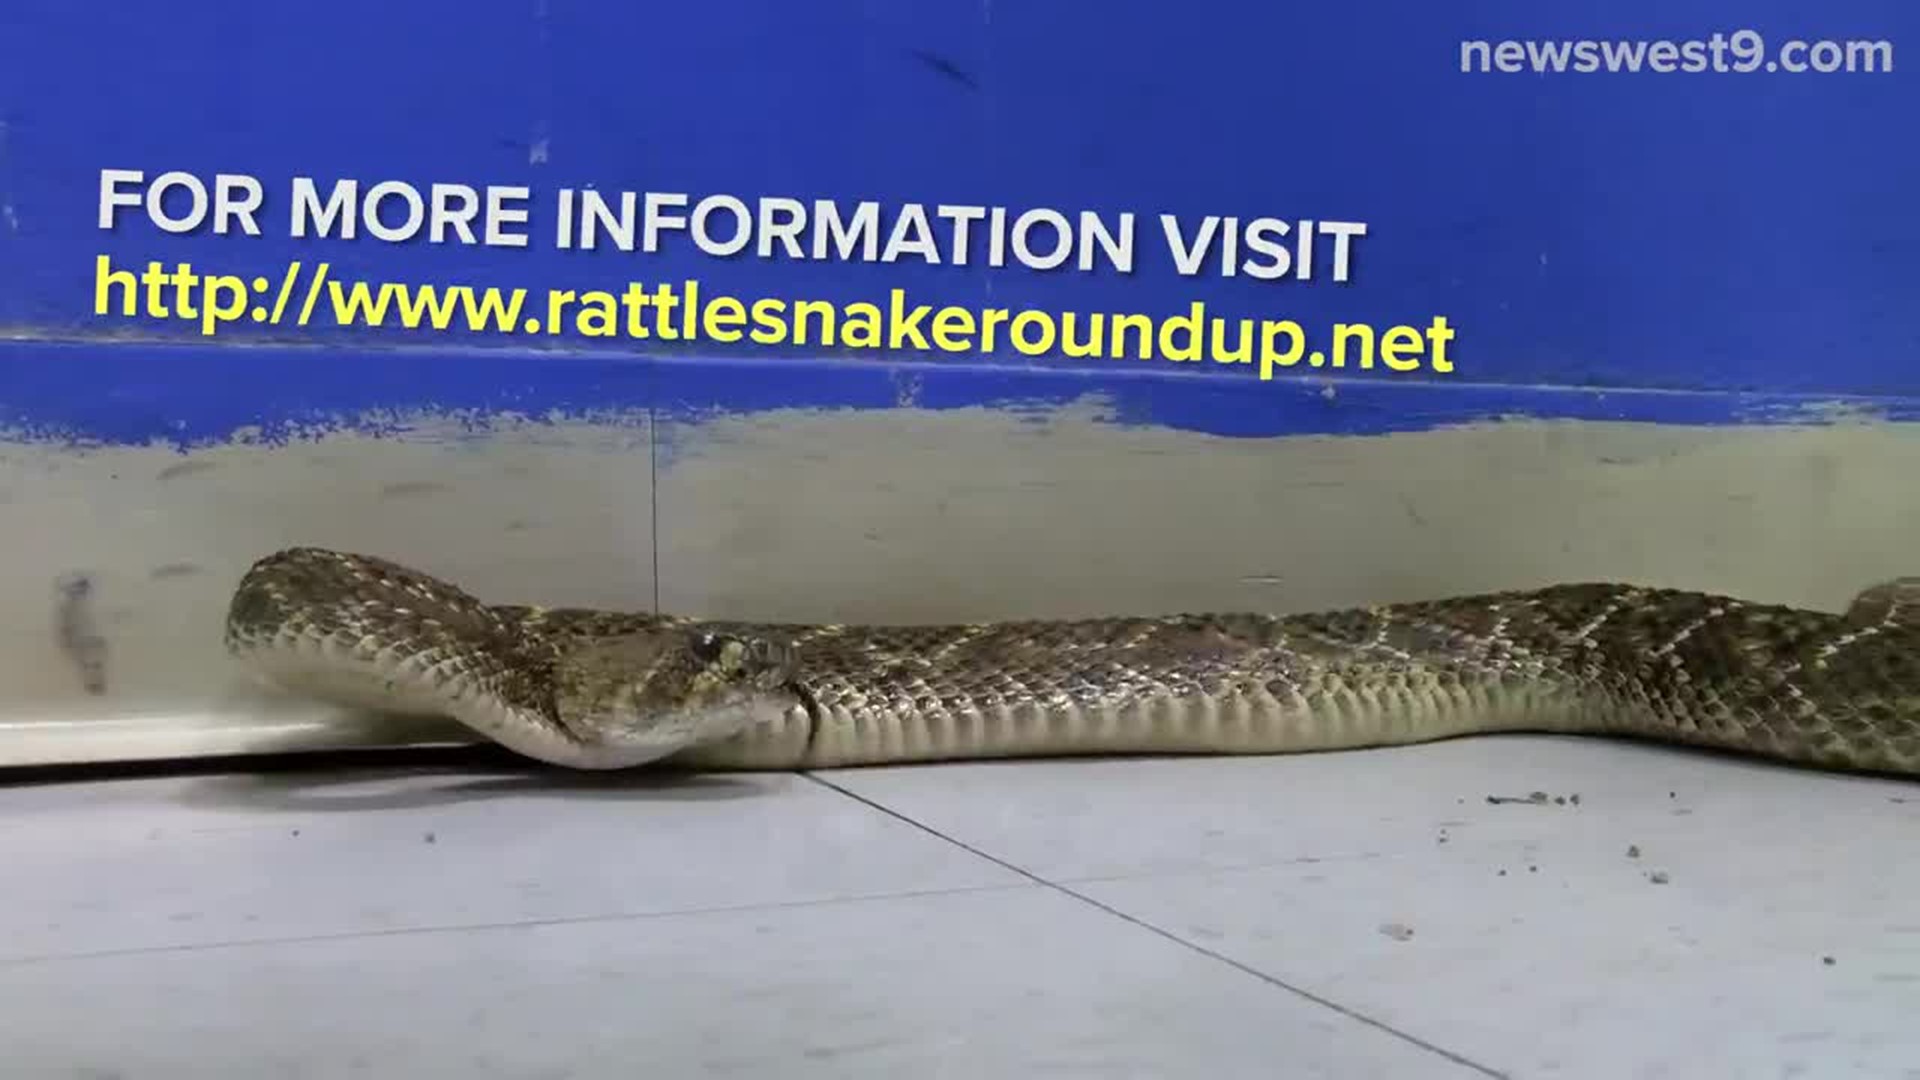 World's Largest Rattlesnake Round-Up comes to Sweetwater